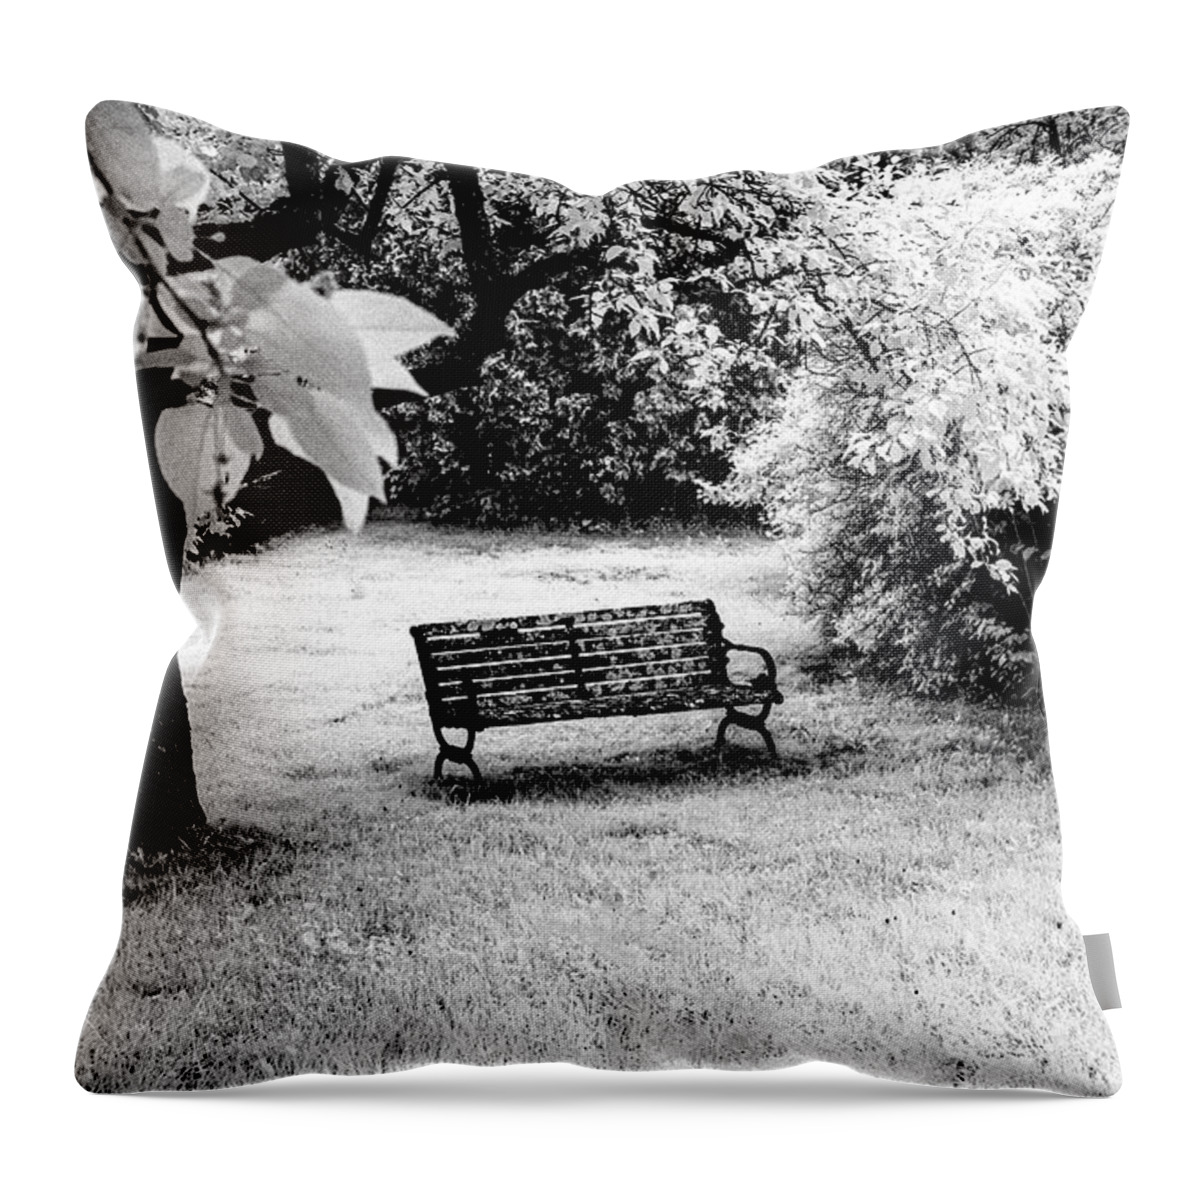 East Dover Vermont Throw Pillow featuring the photograph Bench In Black And White by Tom Singleton